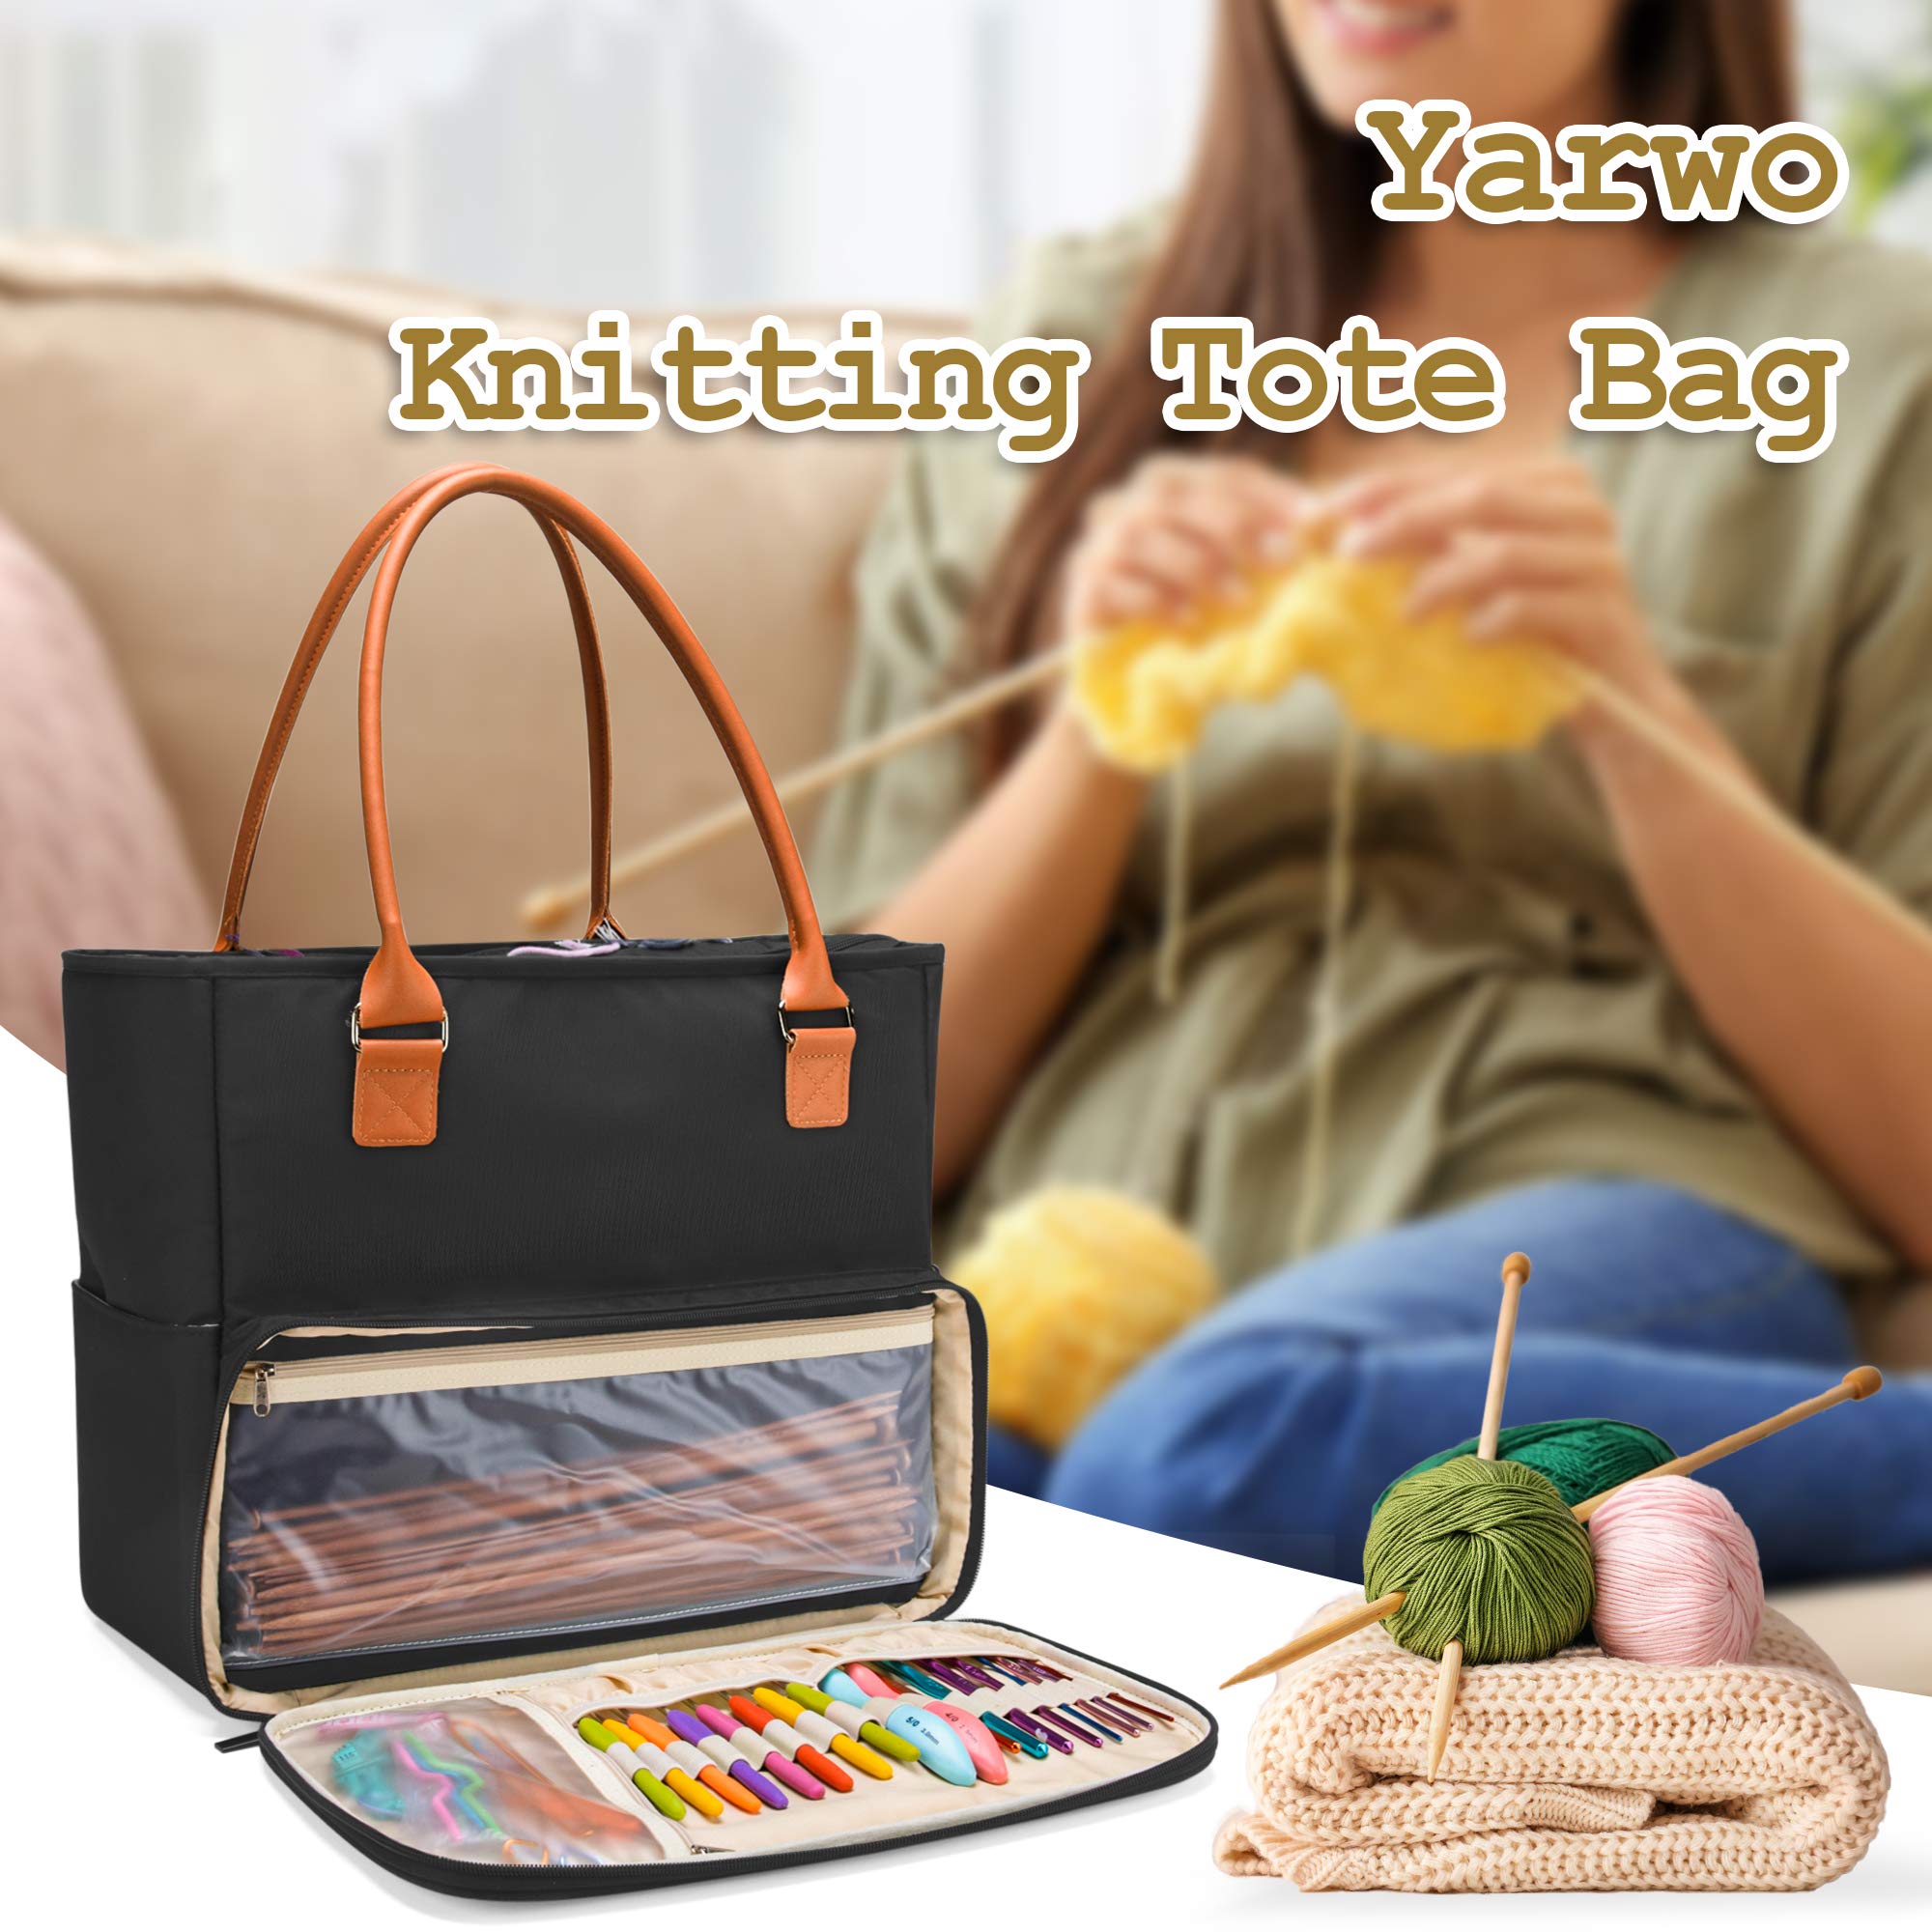 YARWO Knitting Tote Bag with Pockets for WIP Projects, Yarn Storage Organizer Bag for 14” Knitting Needles, Skeins of Yarn and Crochet Hooks, Black